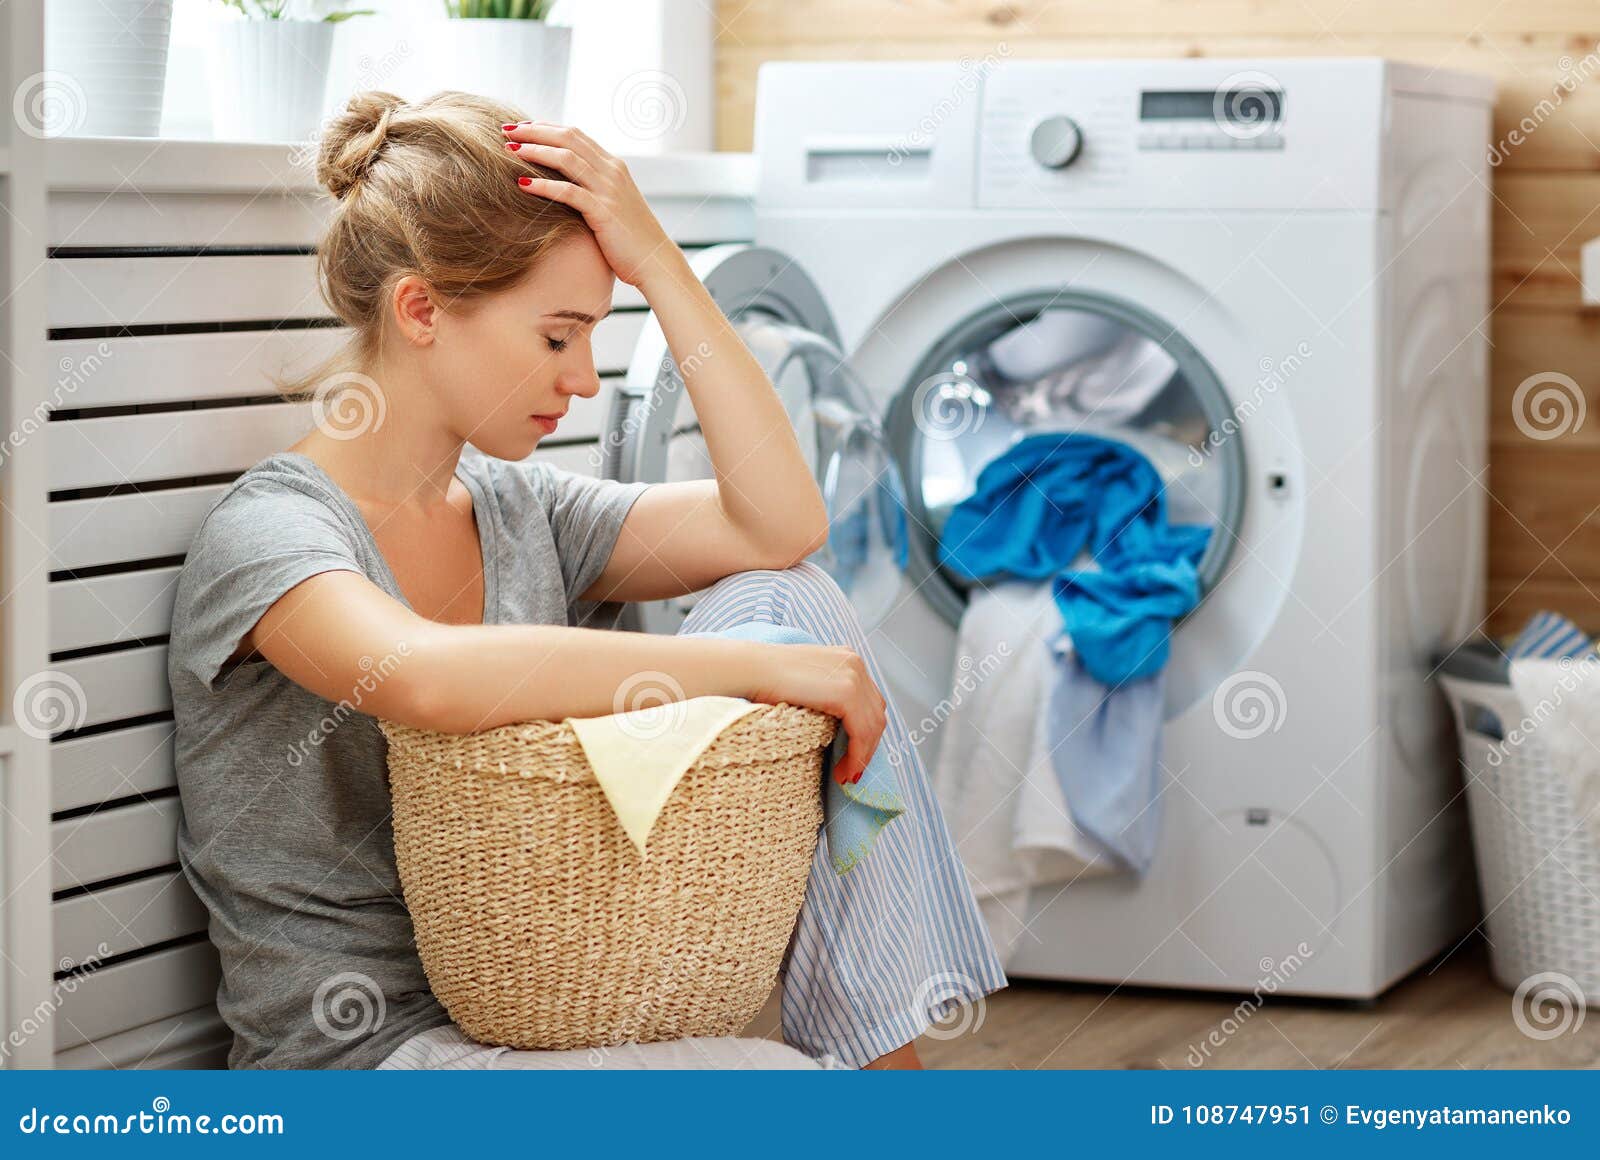 tired housewife woman in stress sleeps in laundry room with wash